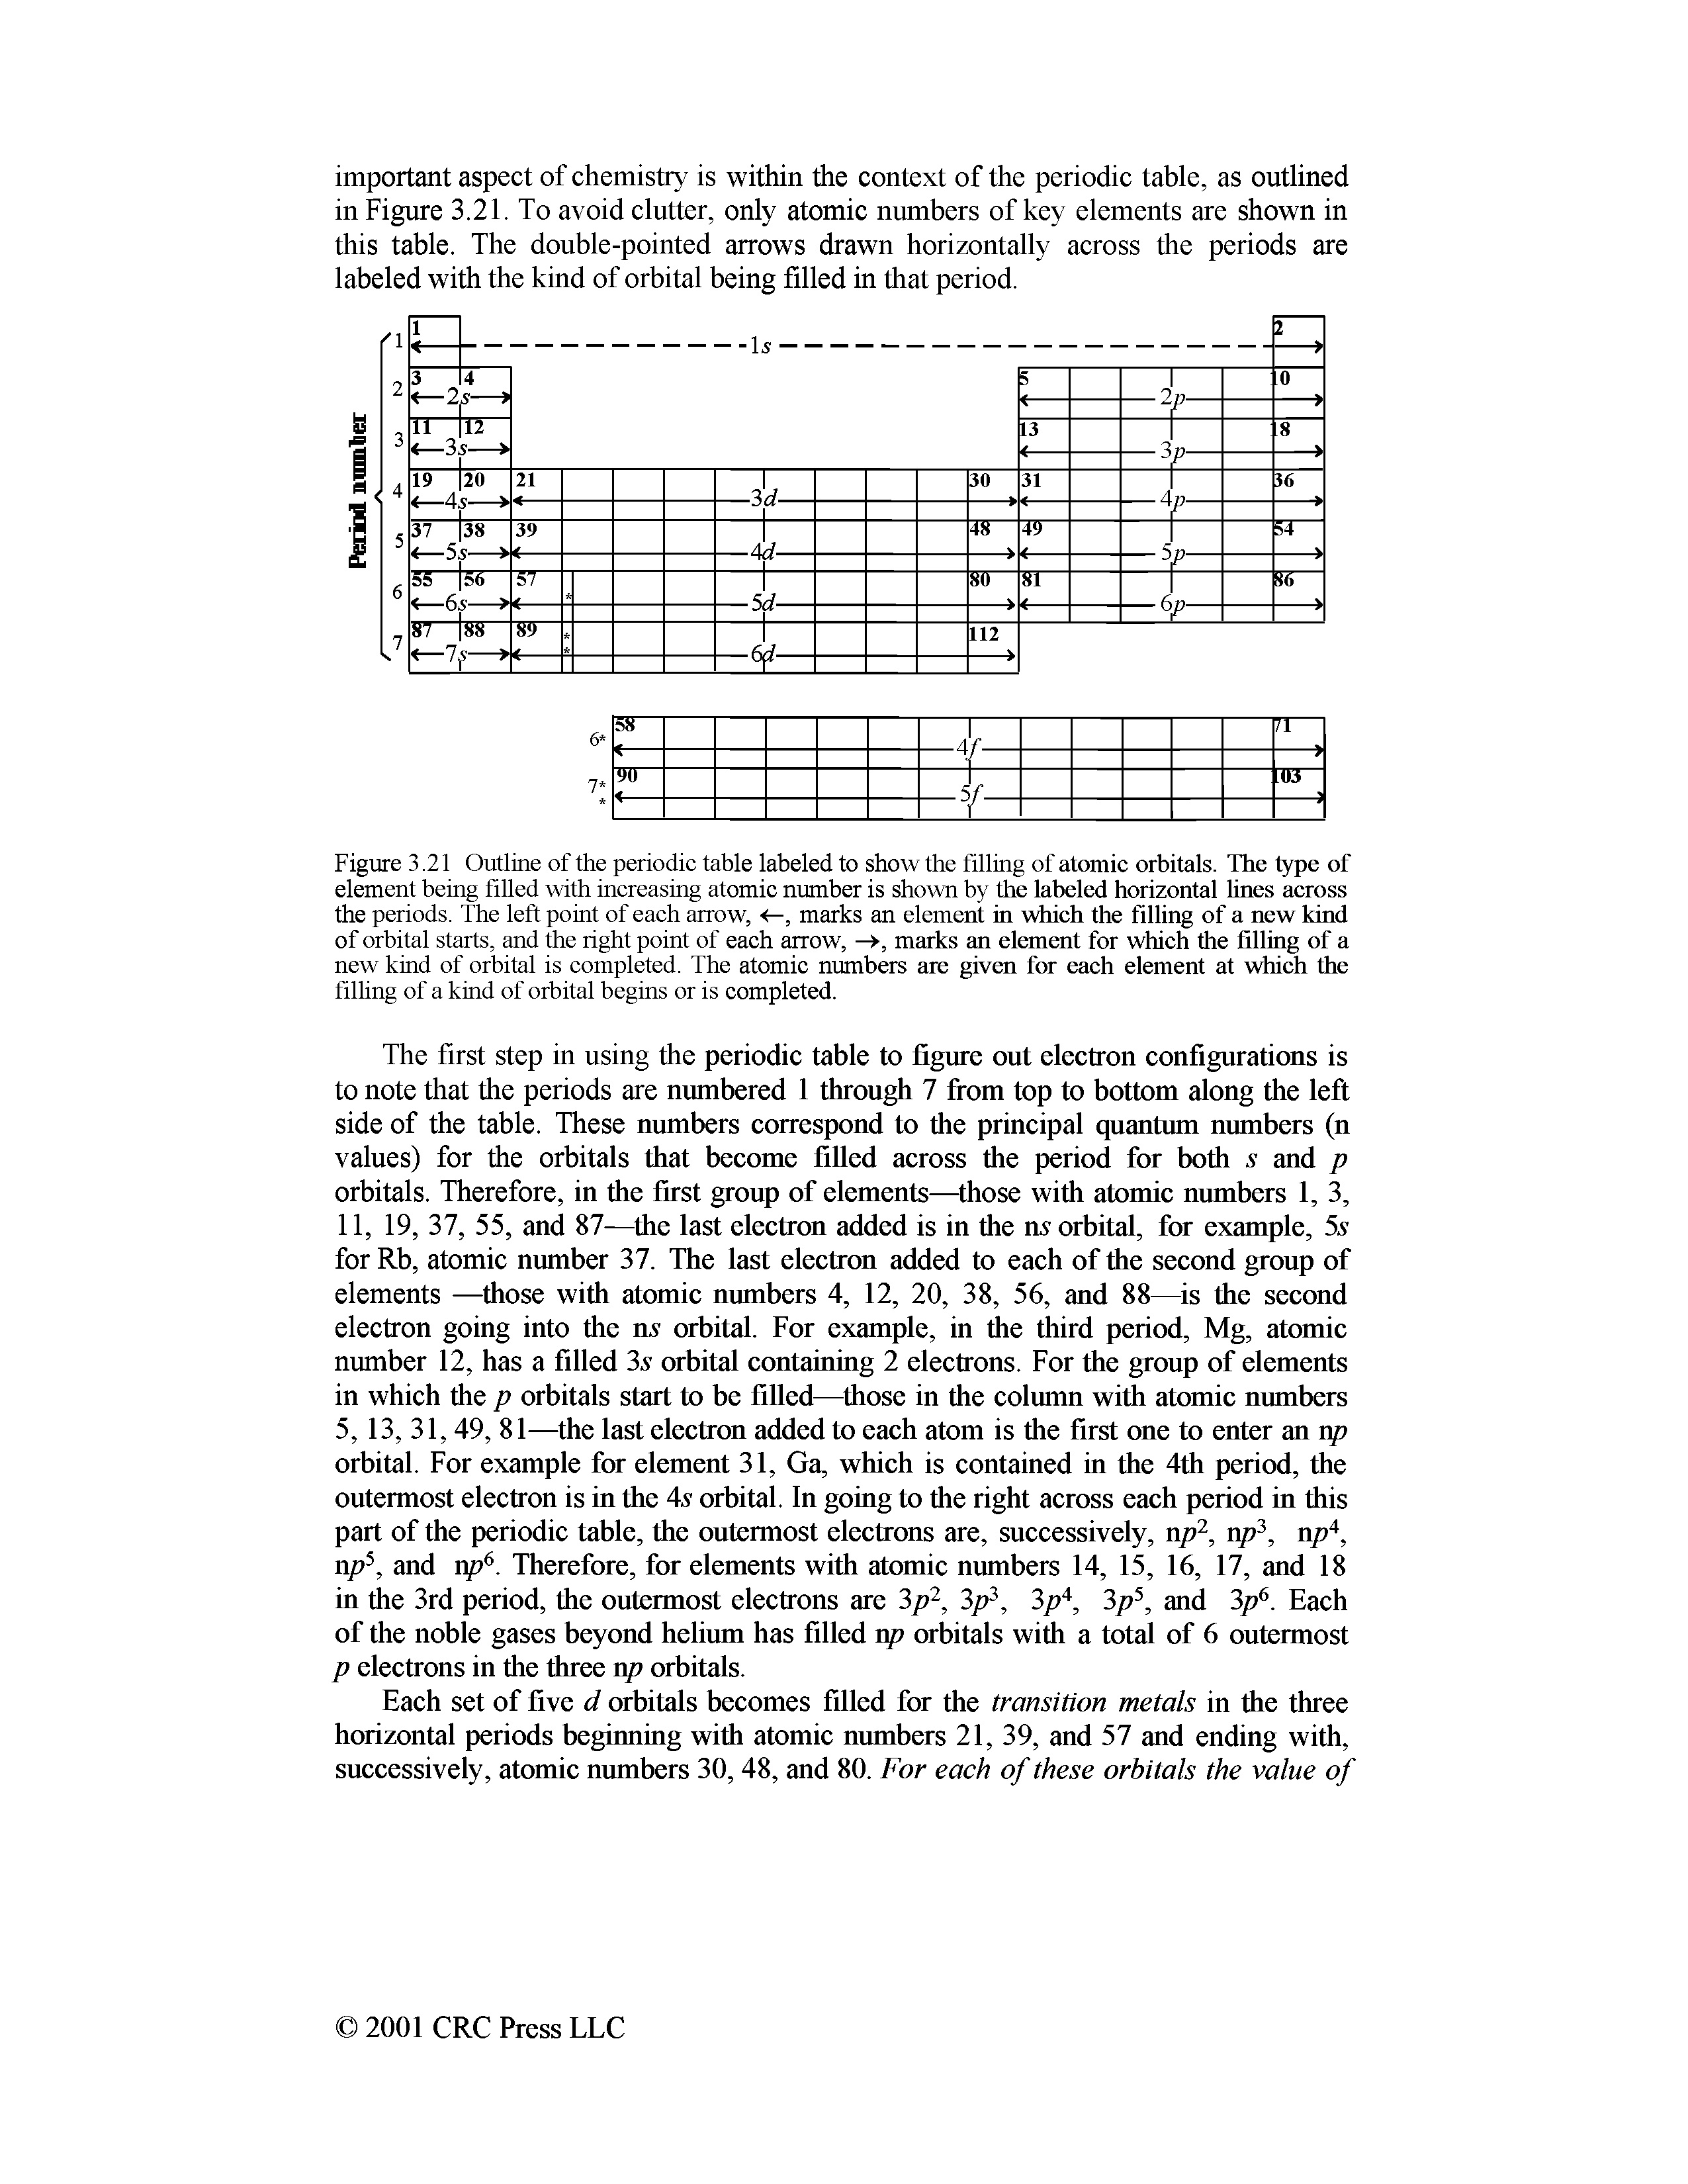 Figure 3.21 Outline of the periodic table labeled to show the filling of atomic orbitals. The type of element being filled with increasing atomic number is shown by the labeled horizontal lines aeross the periods. The left point of each arrow, marks an element in which the filling of a new kind...